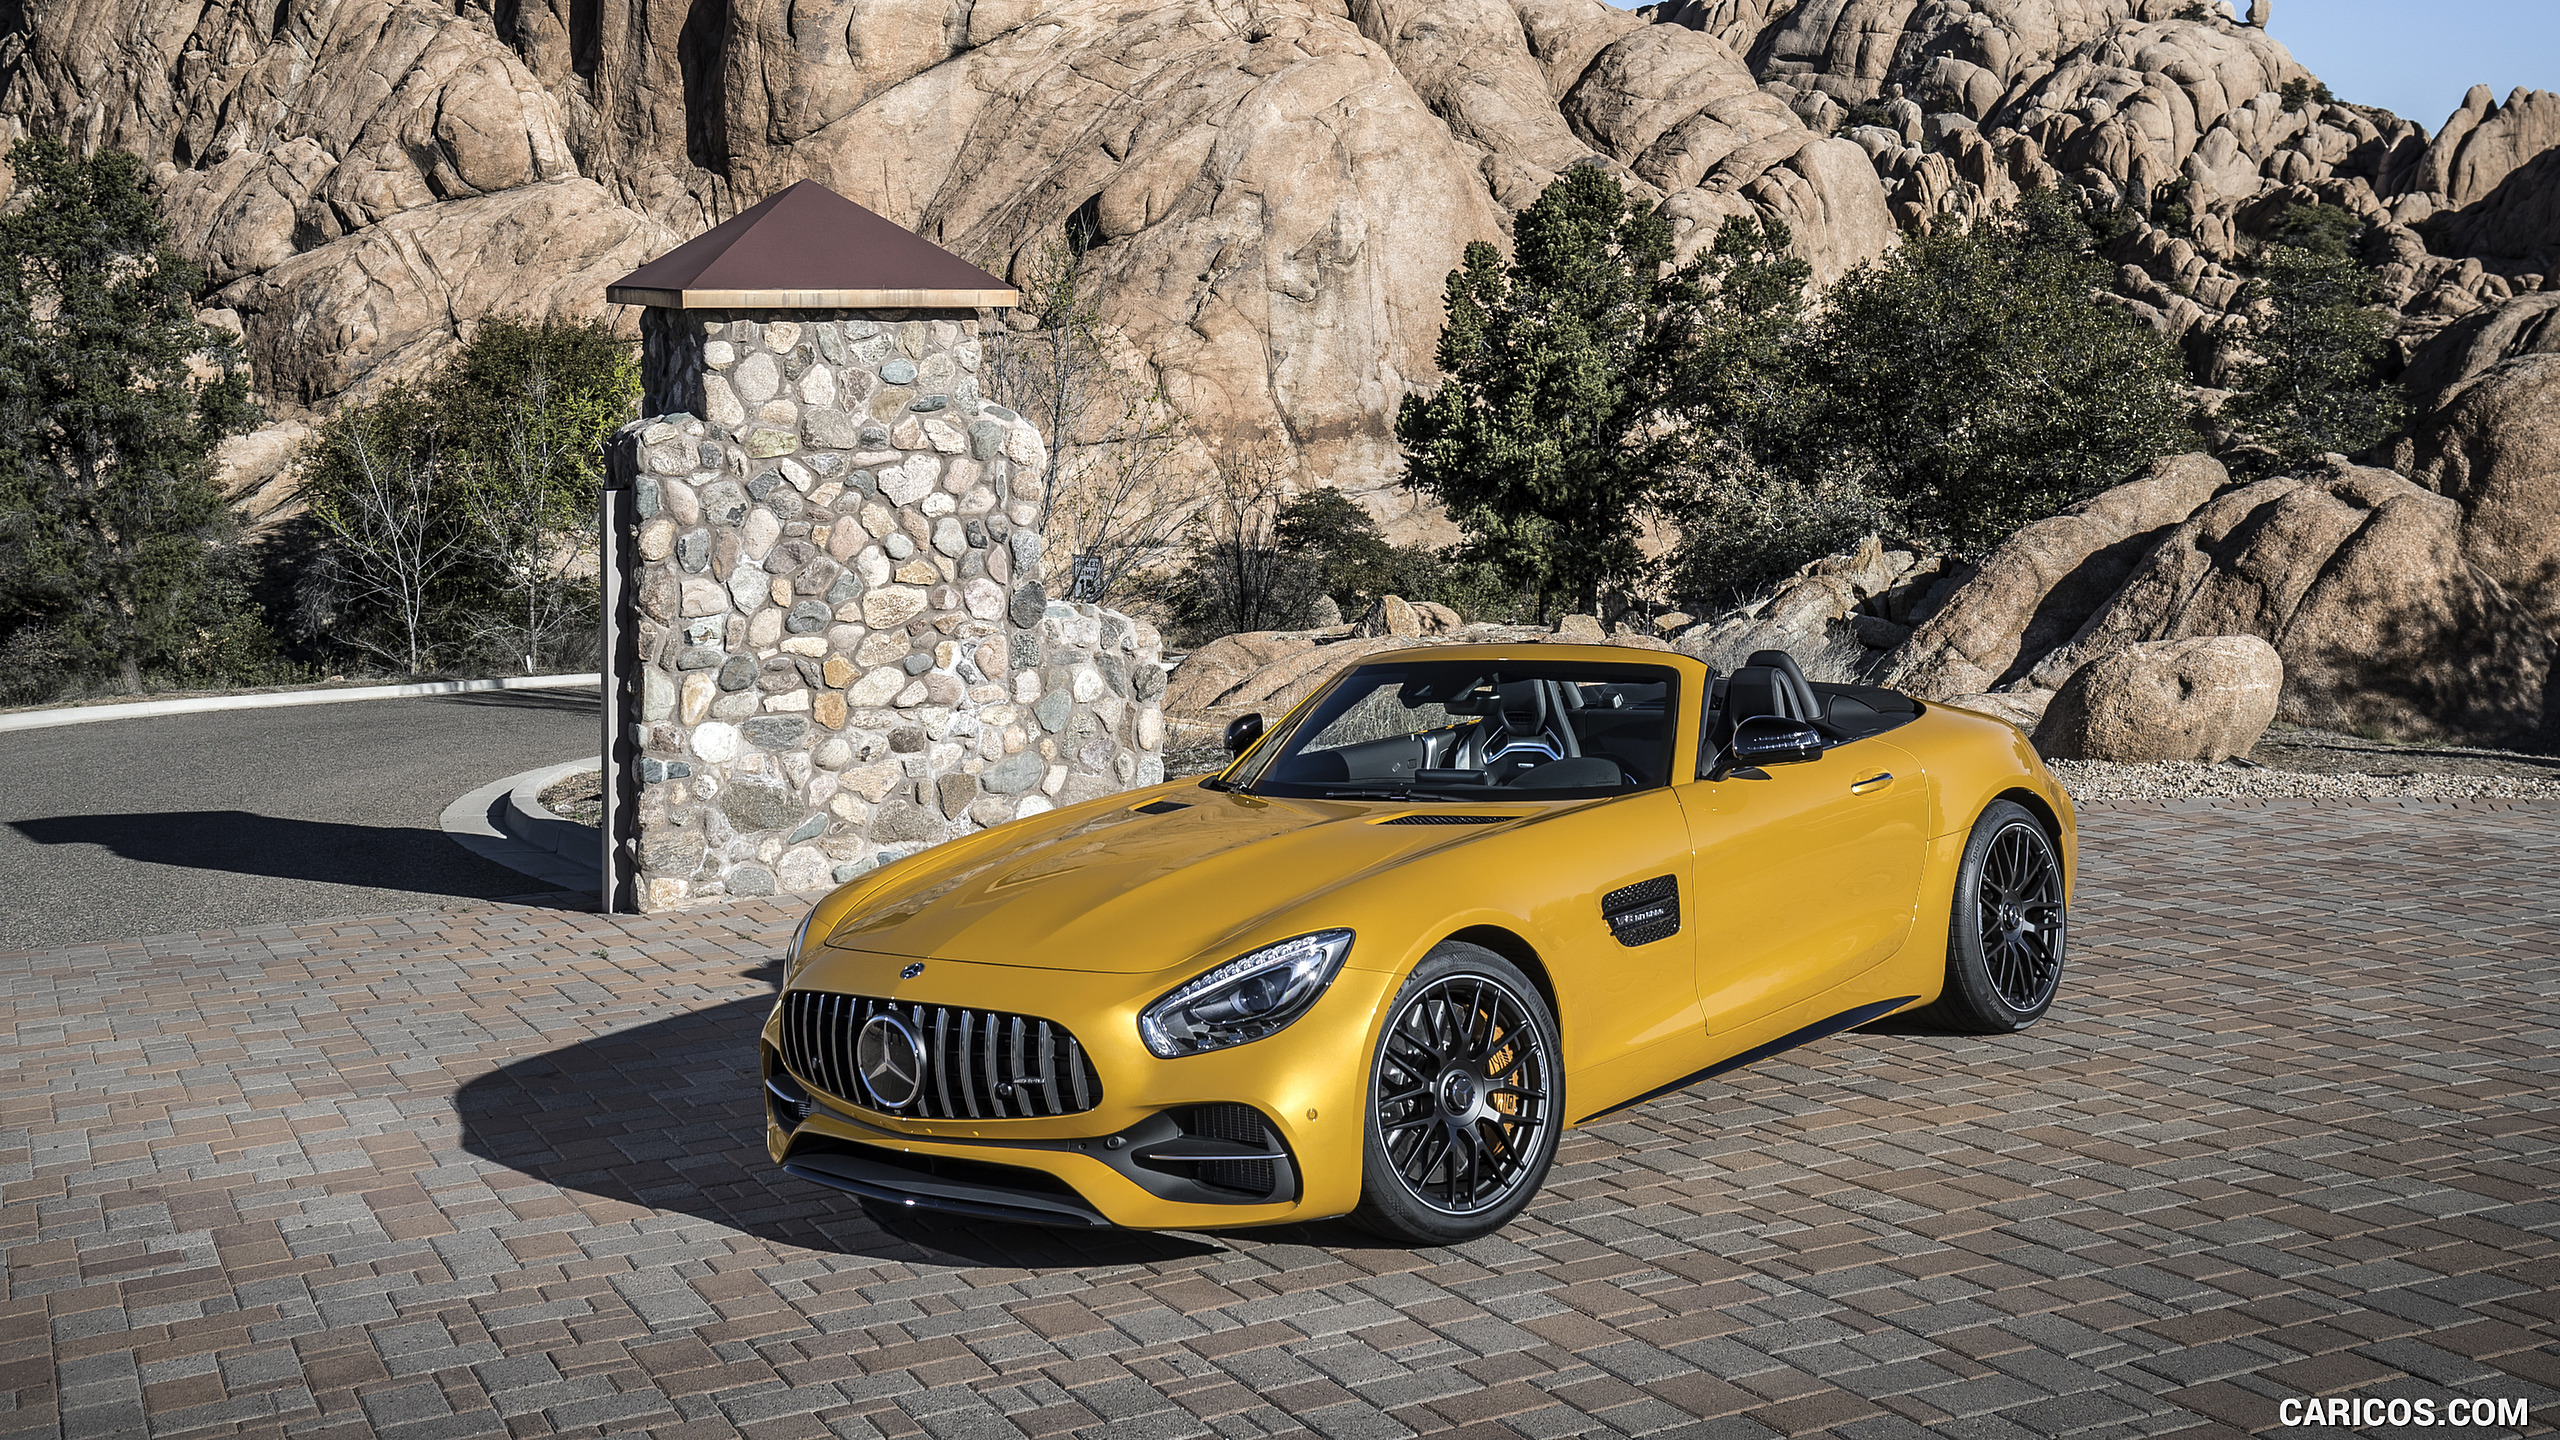 2018 Mercedes-AMG GT C Roadster - Front Three-Quarter, #176 of 350